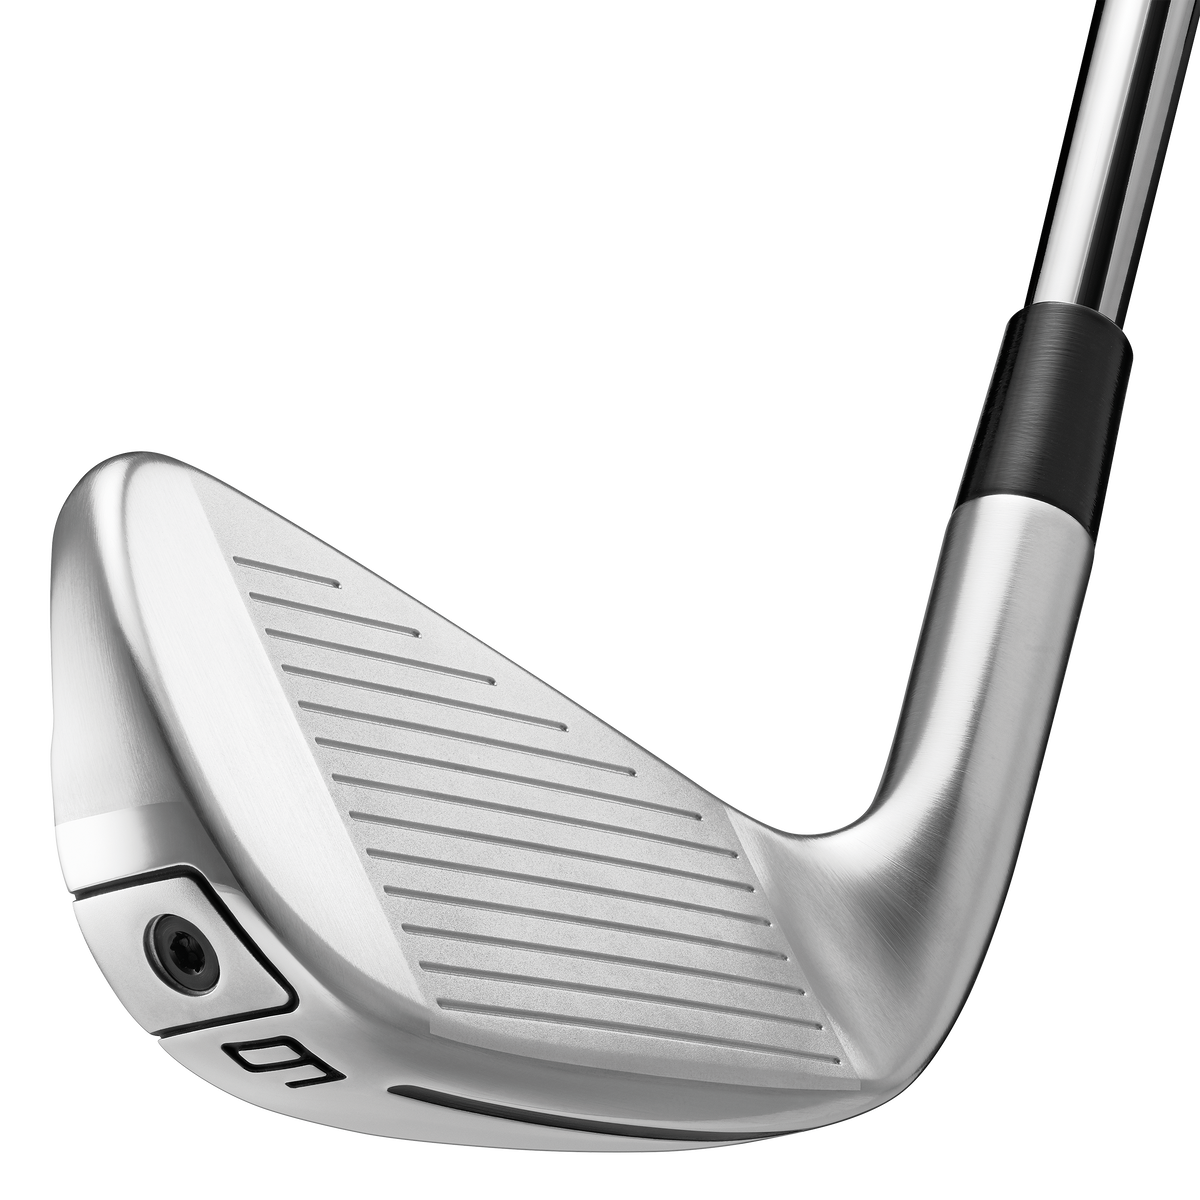 Clubface of TaylorMade P790 Iron